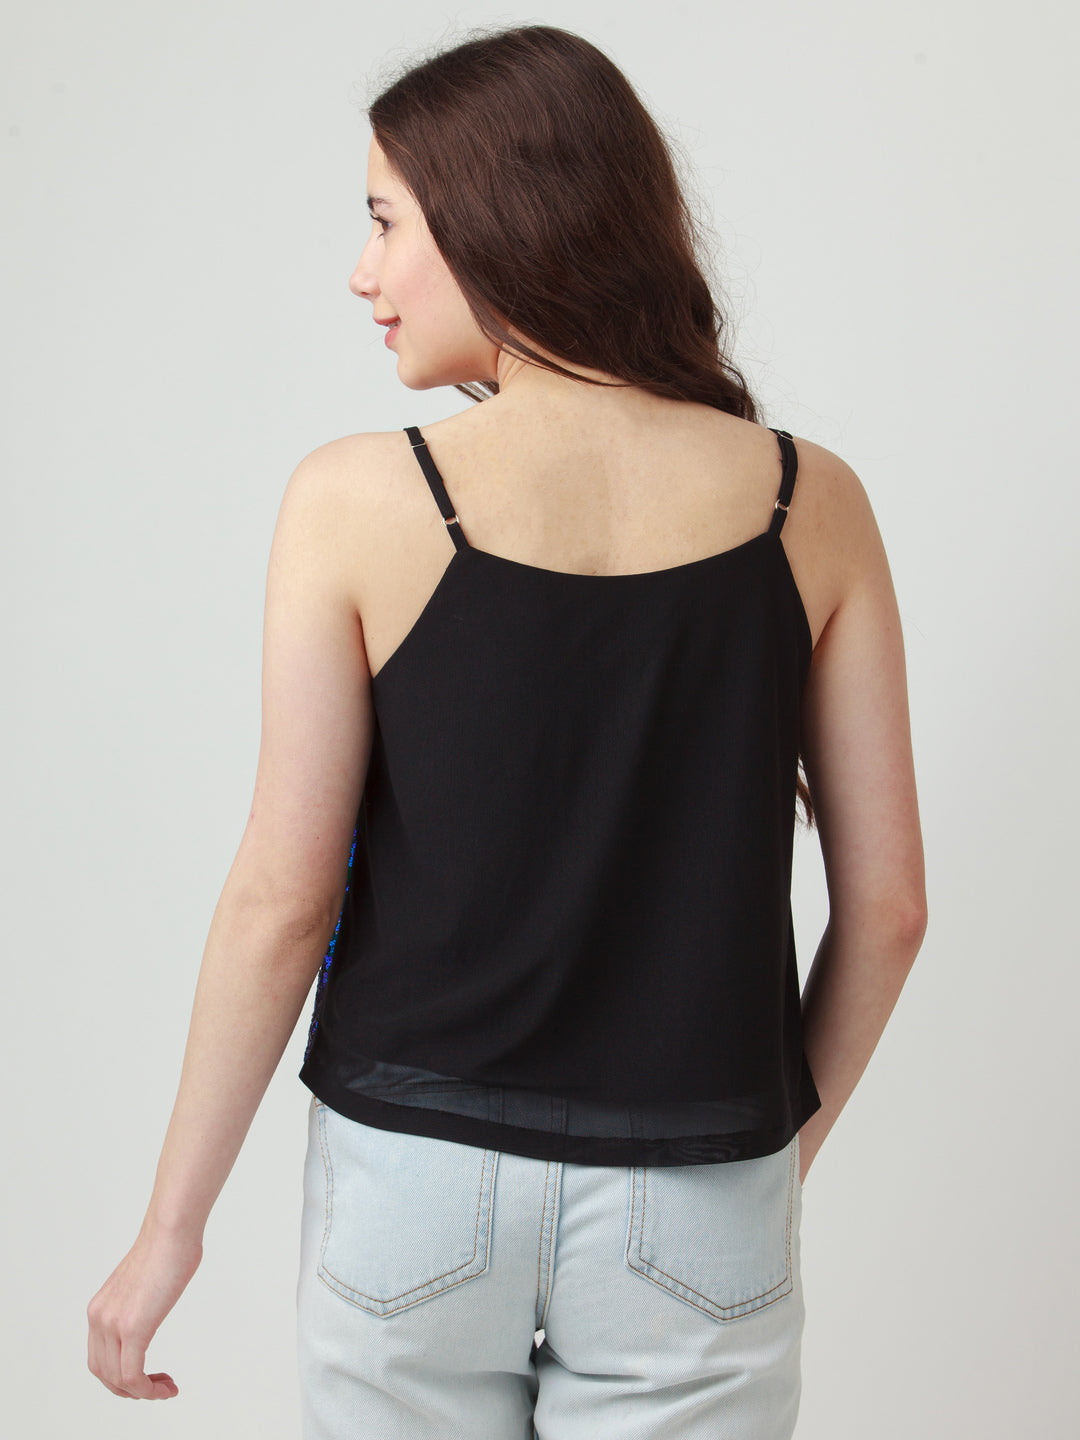 Black Embellished Strappy Top For Women